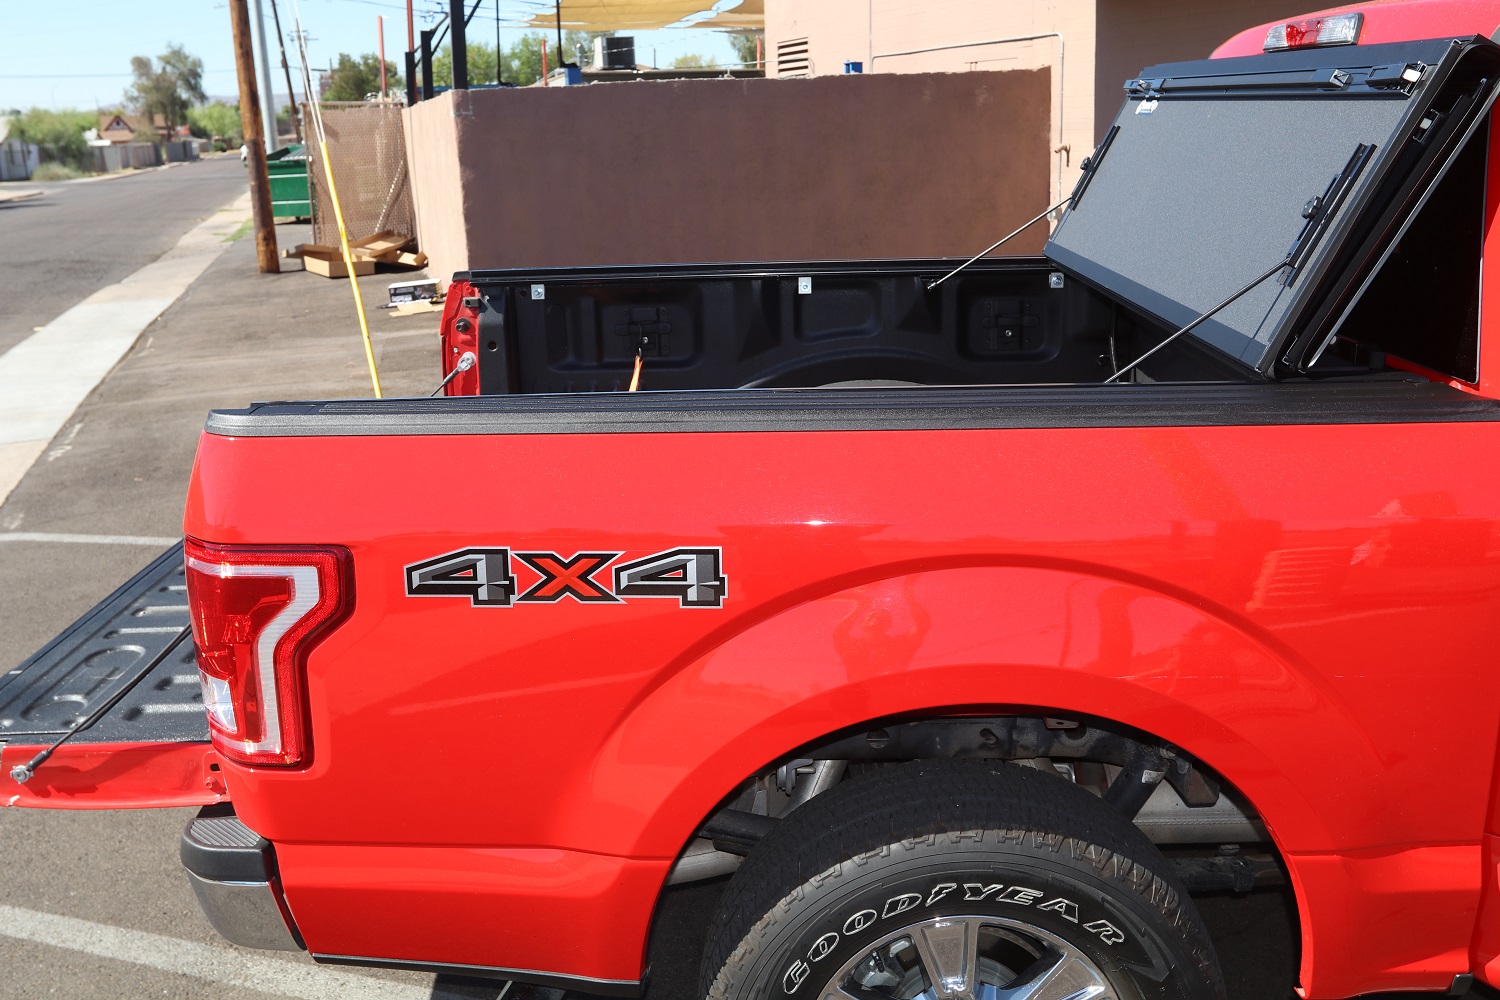 ford f150 bakflip mx4 hard truck bed cover